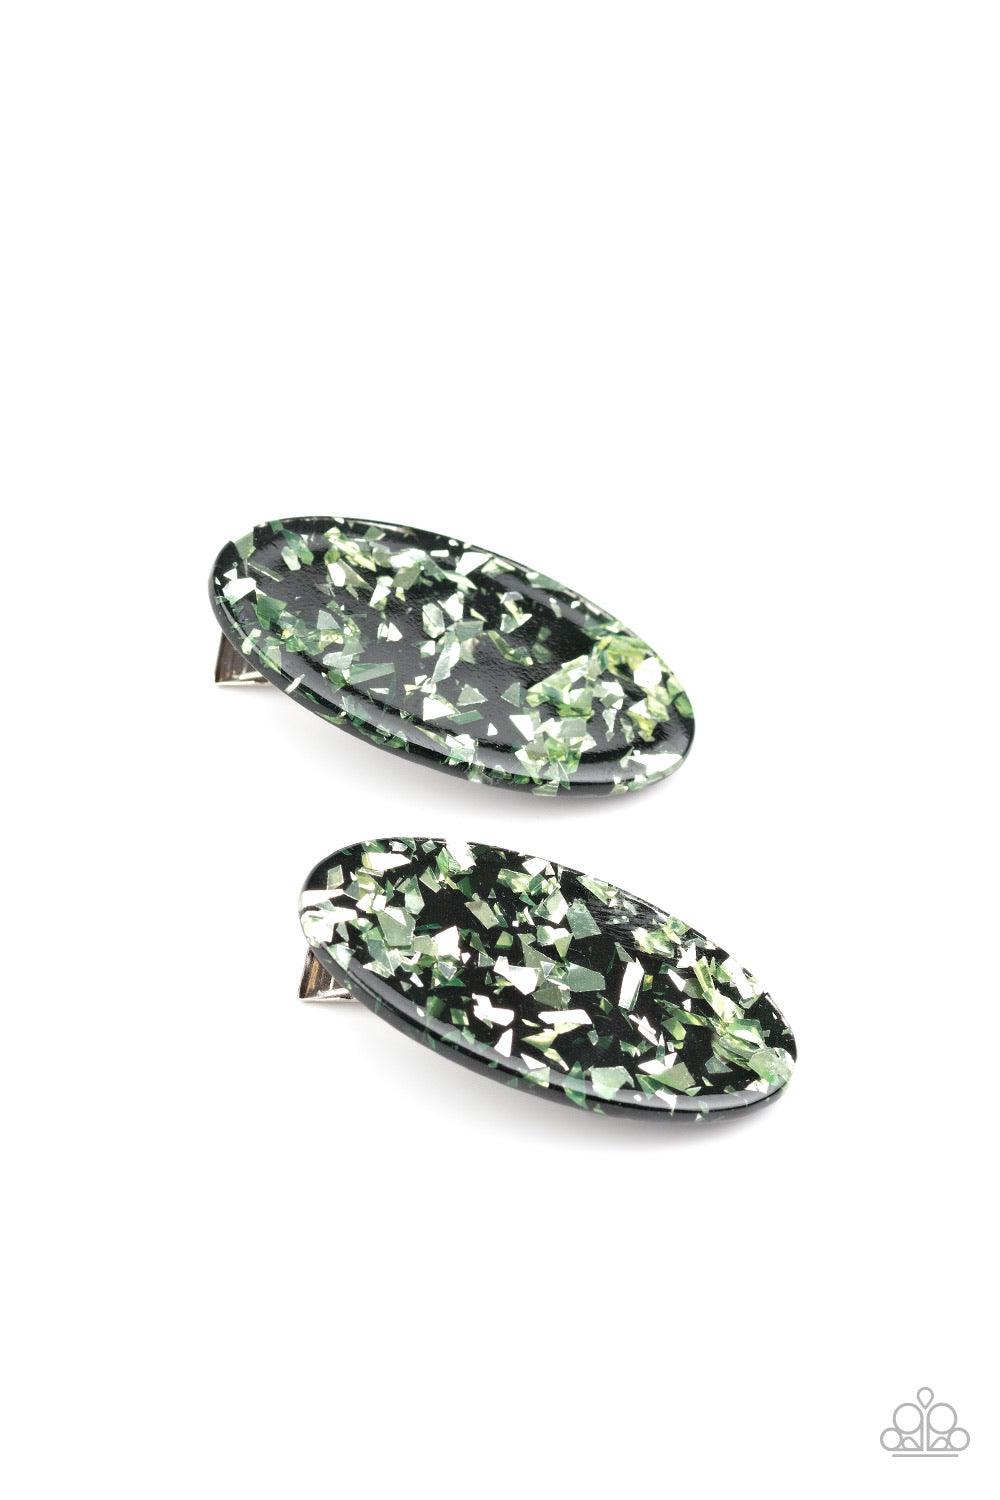 Paparazzi Accessories Get OVAL Yourself - Black Featuring green iridescent flecks, a pair of black oval hair clips pull back the hair for a retro look. Features a standard hair clip on the back. Hair Accessories